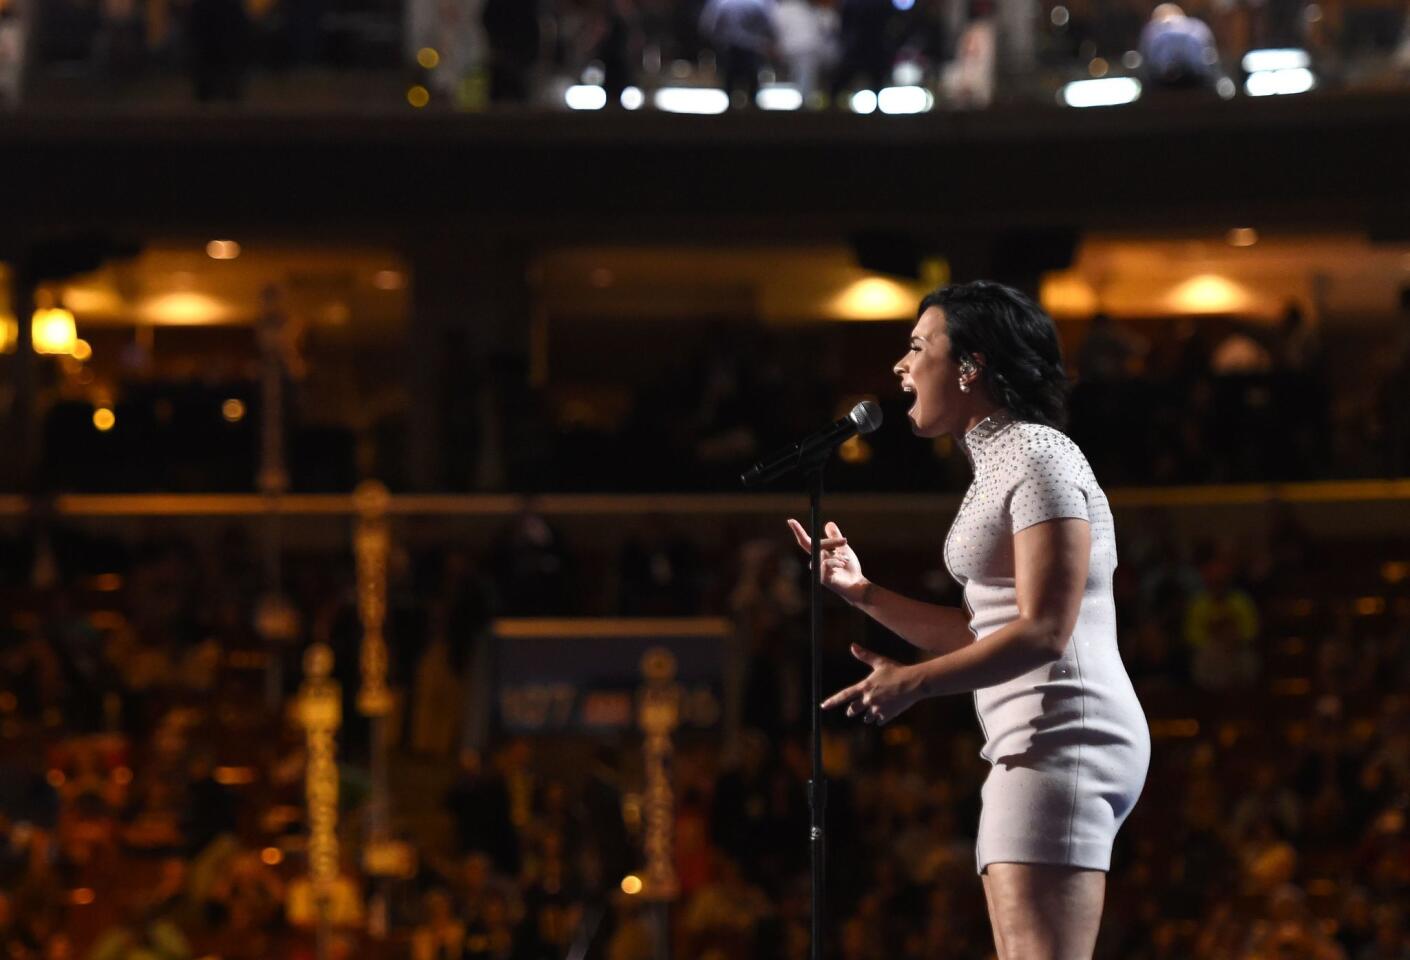 Singer Demi Lovato performs on Day 1 of the Democratic National Convention at the Wells Fargo Center on July 25, 2016 in Philadelphia, Pennsylvania.